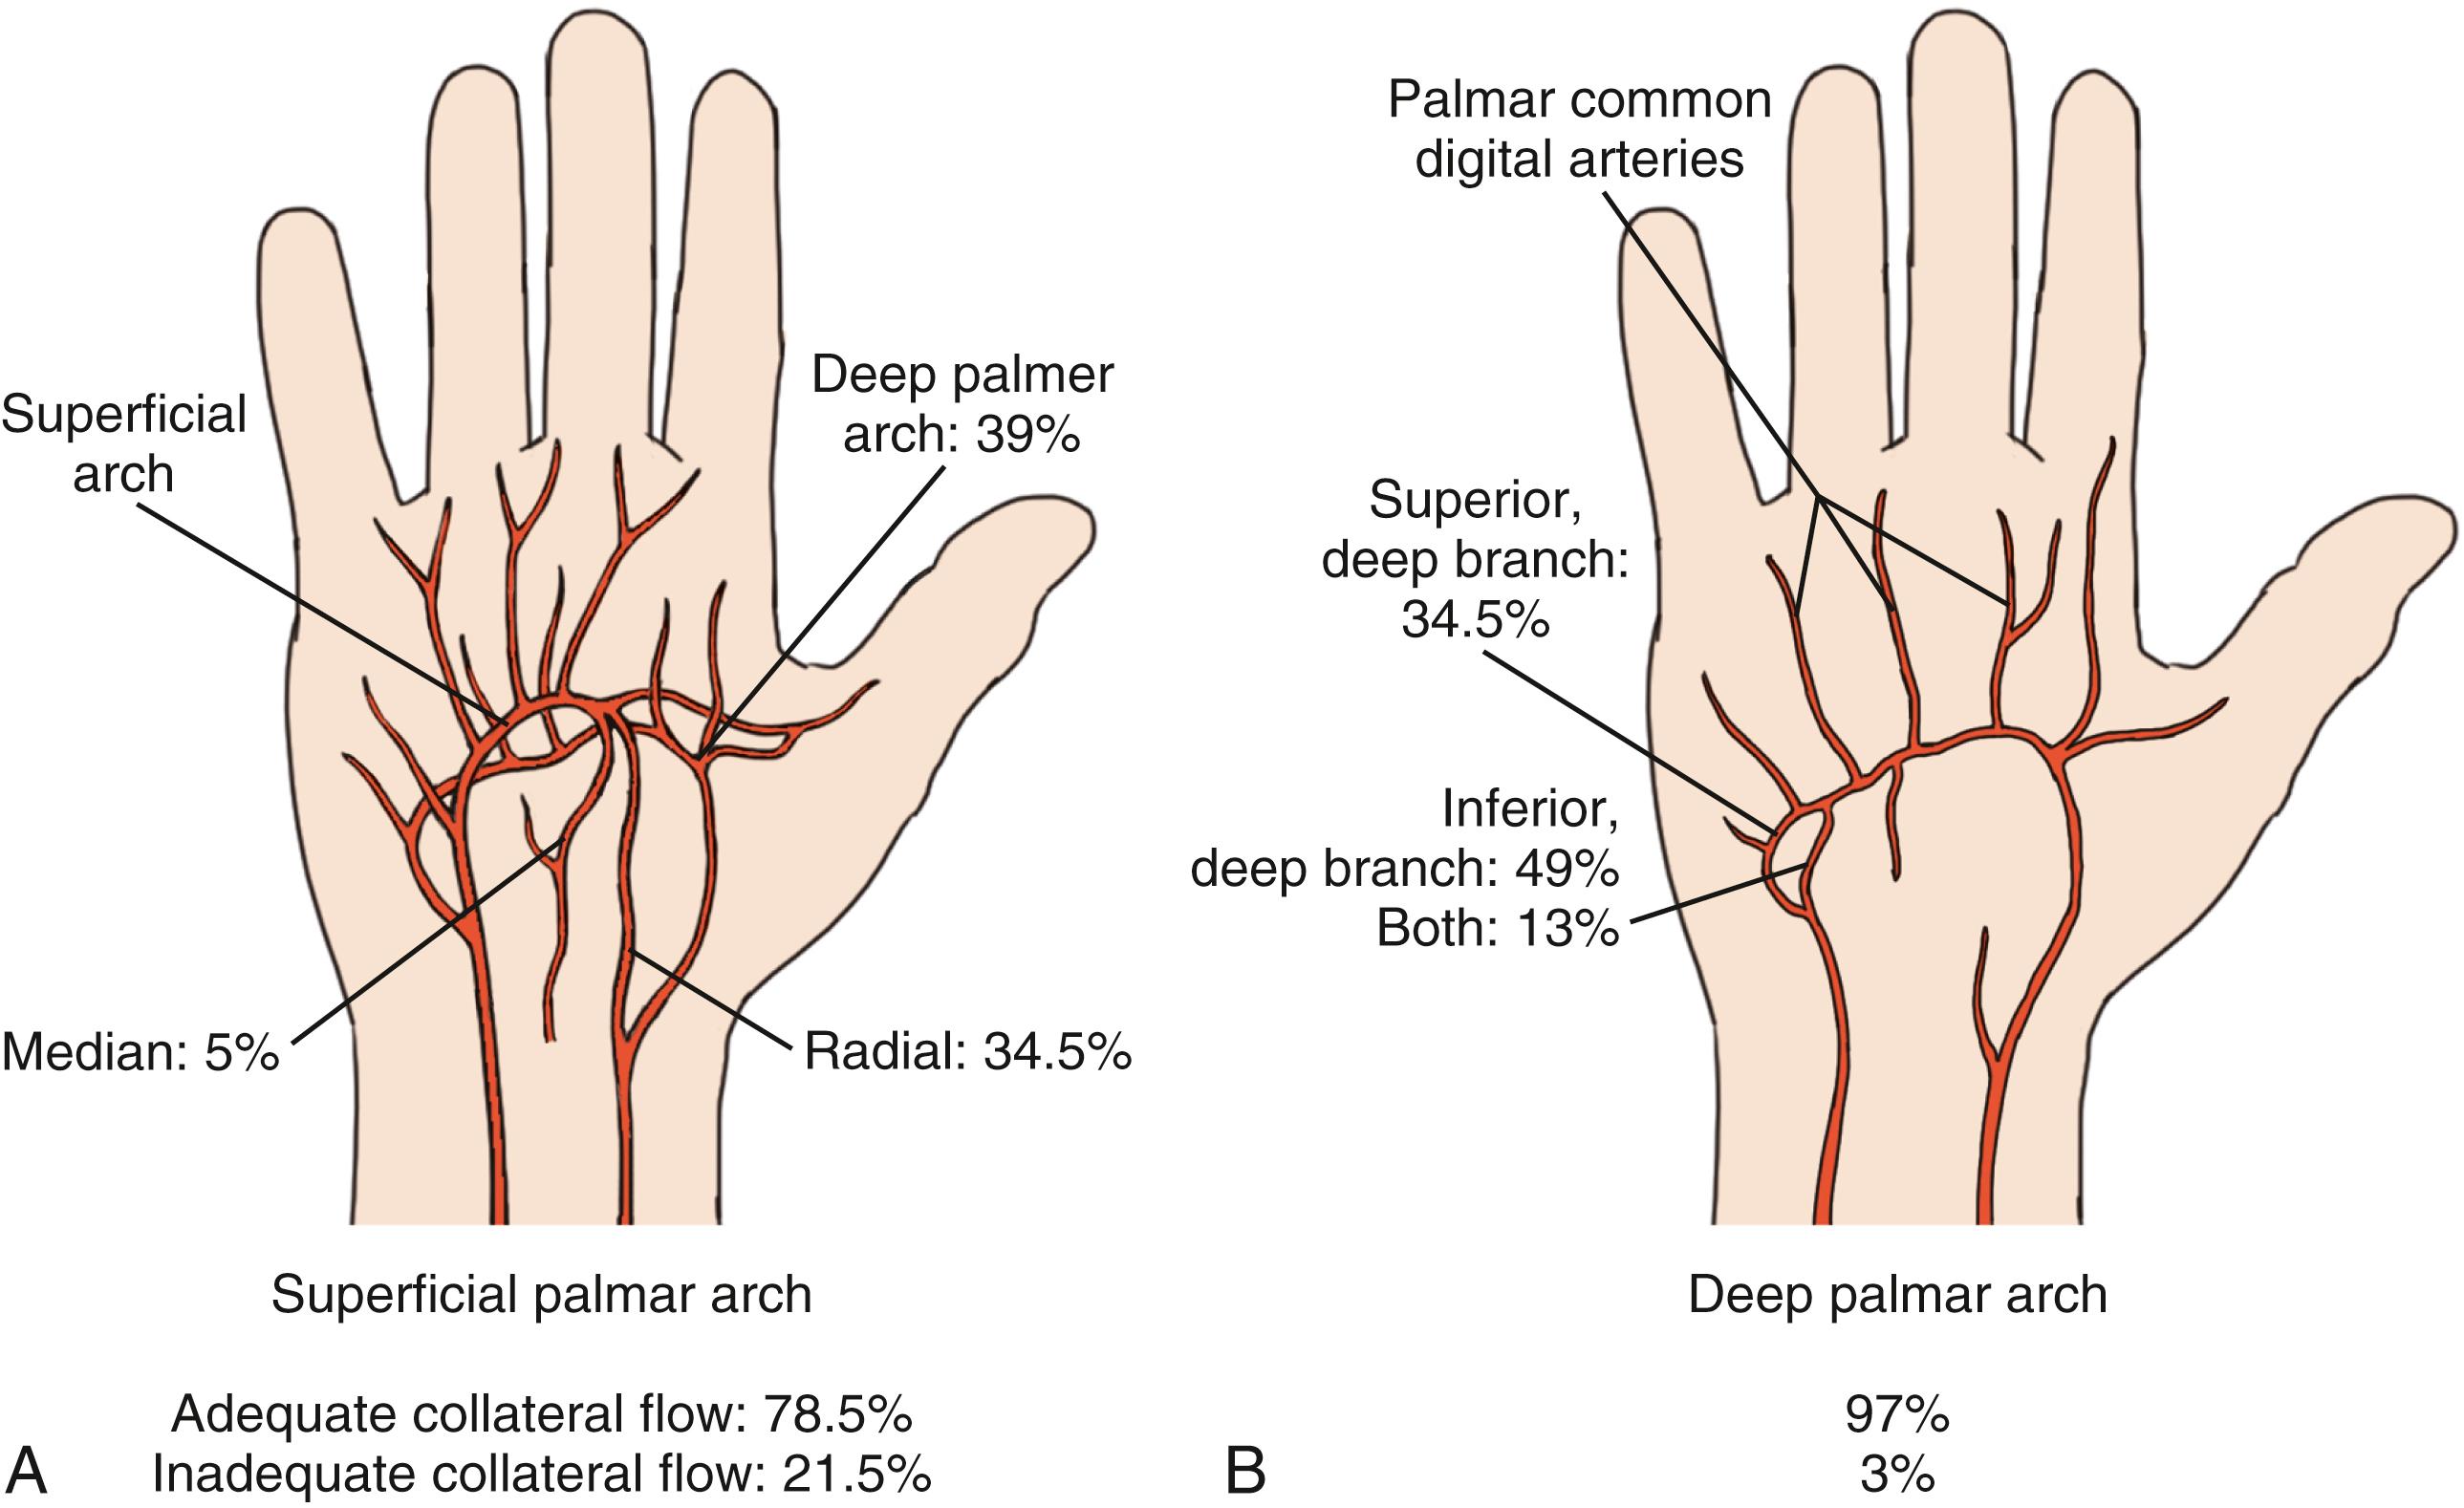 Fig. 60.1, A and B, The superficial palmar arch is “completed” by branches from the deep palmar arch, radial artery, or median artery in 78.5% of patients; the remaining 21.5% are “incomplete.” The deep palmar arch is “completed” by the superior branch of the ulnar artery, the inferior branch of the ulnar artery, or both in 98.5% of patients.